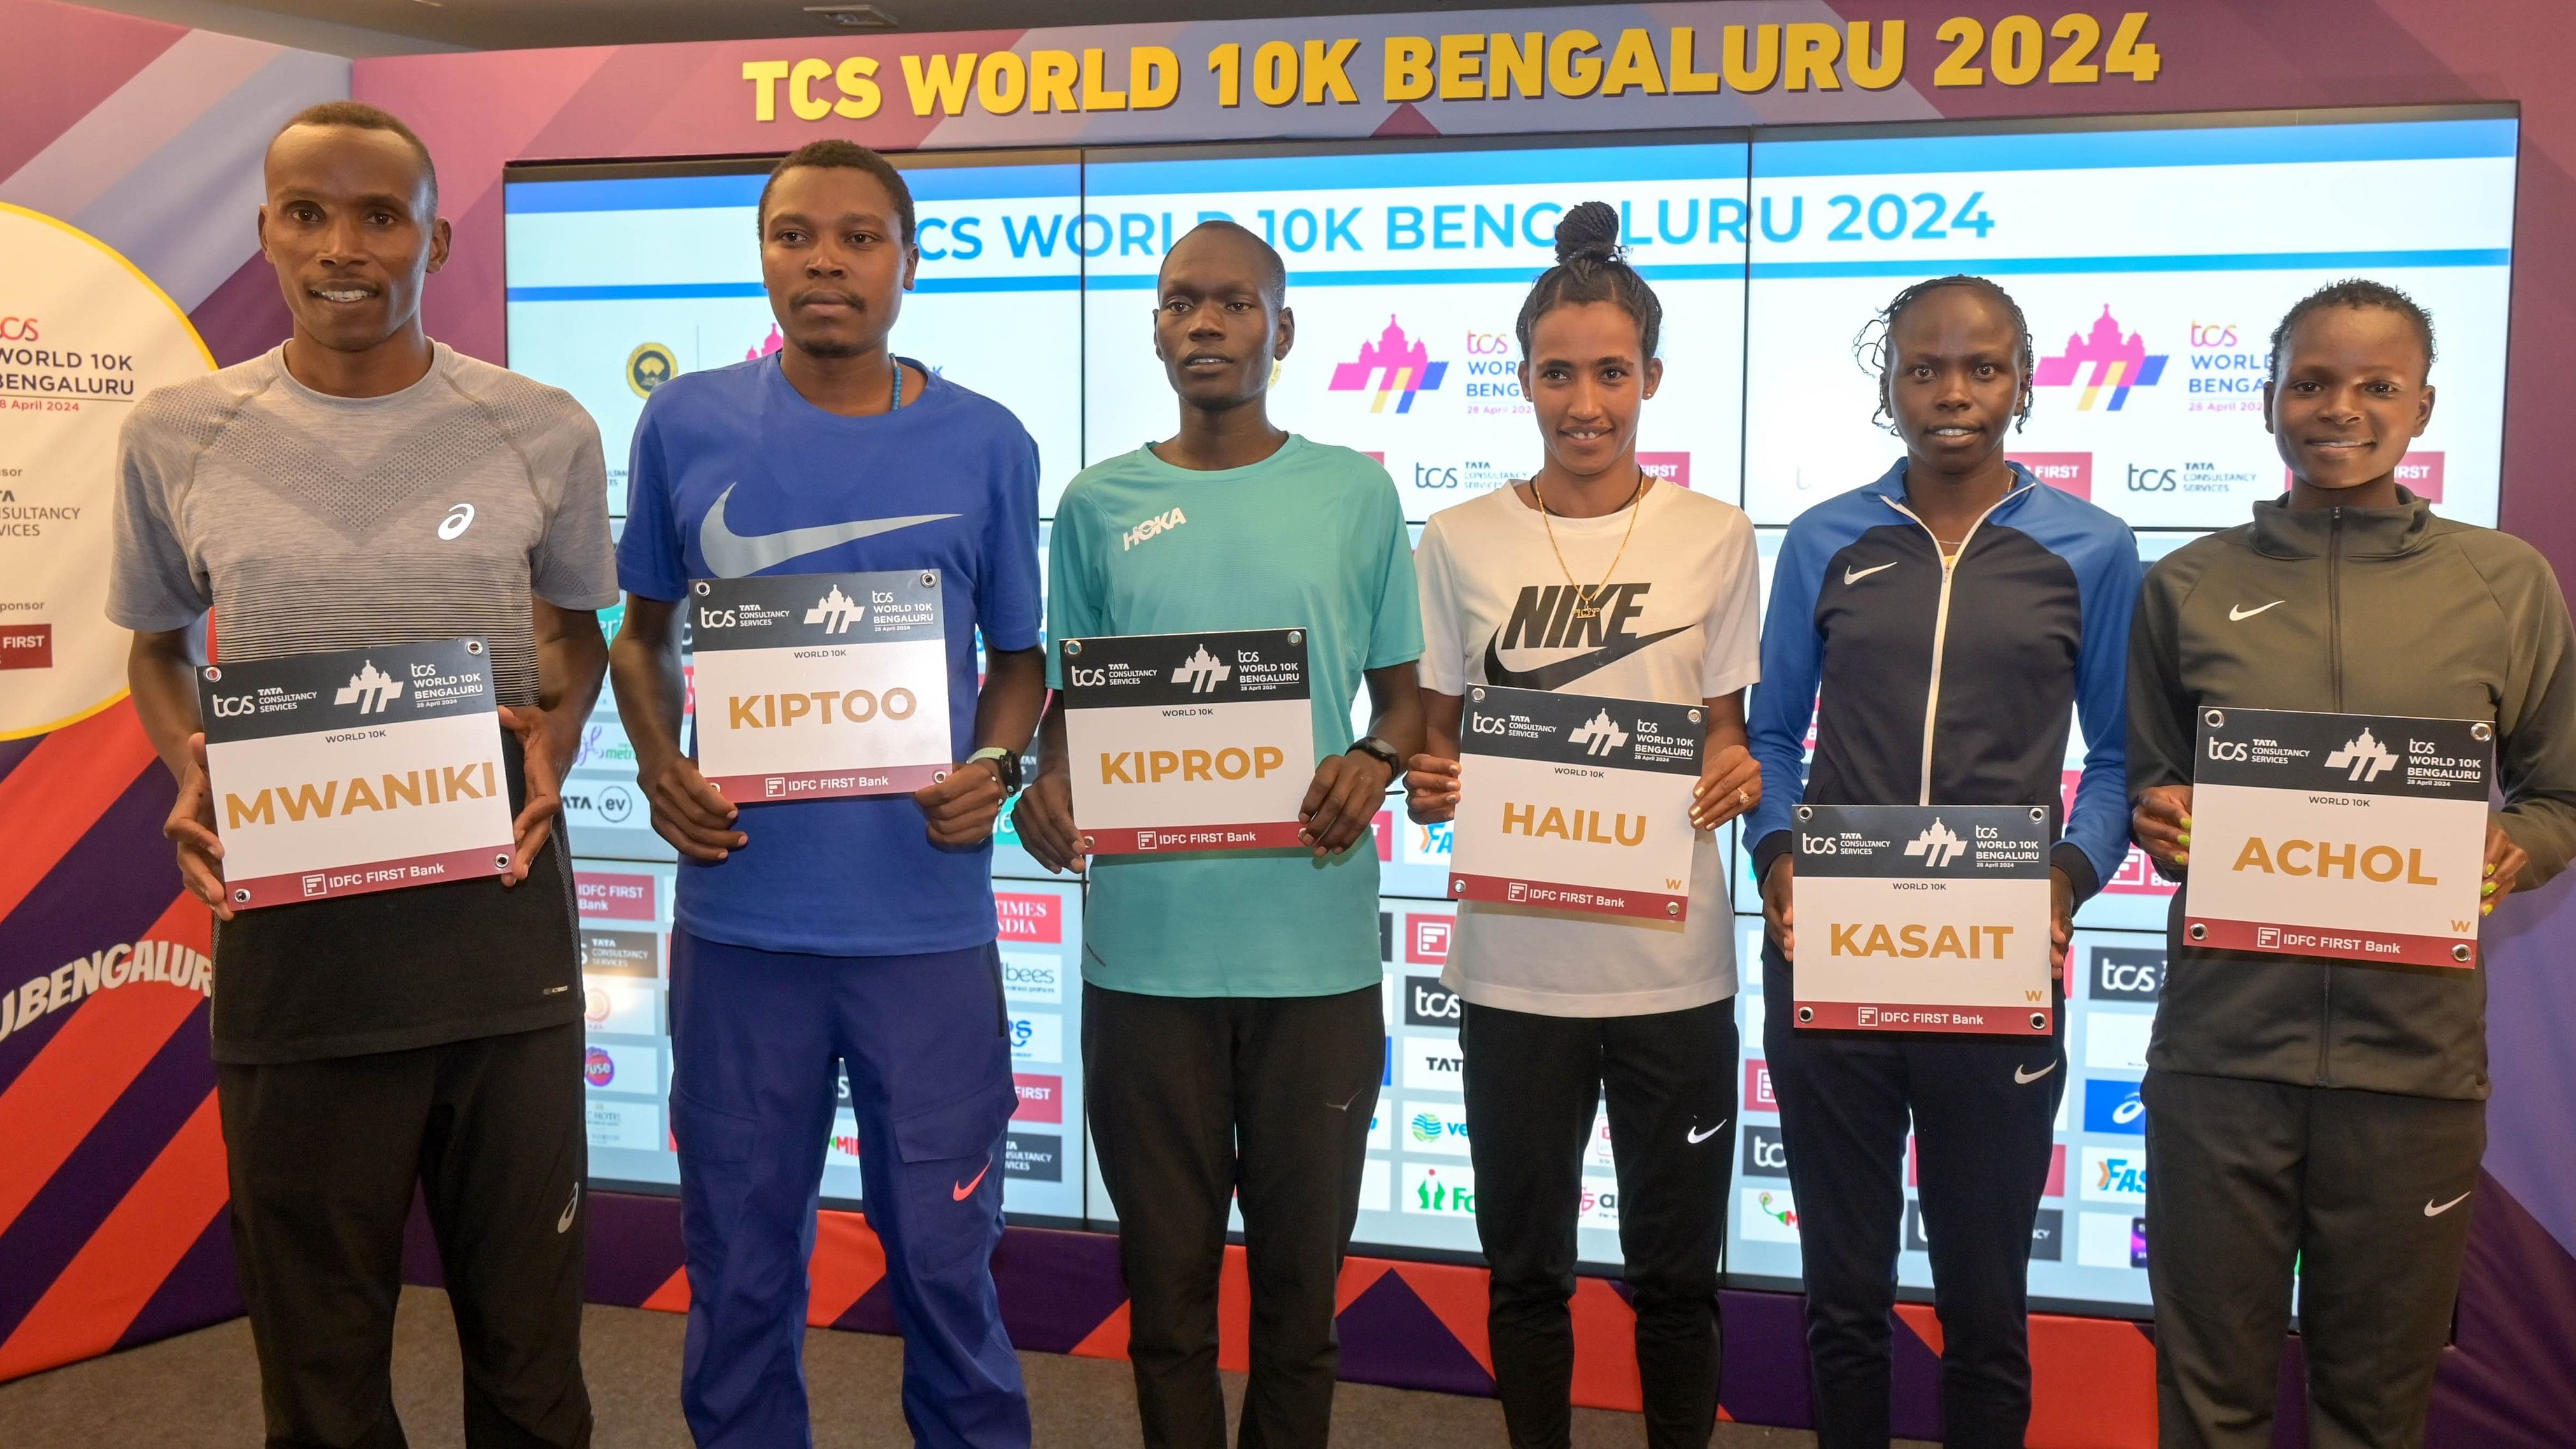 <div class="paragraphs"><p>(From left) Peter Mwaniki, Bravin Kiptoo, Bravin Kiprop, Lemlem Hailu, Lilian Kasait and Emmaculate Achol, the international elite athletes who will be in fray at the TCS World 10K Bengaluru on April 28, pose during a media interaction on Friday. </p></div>